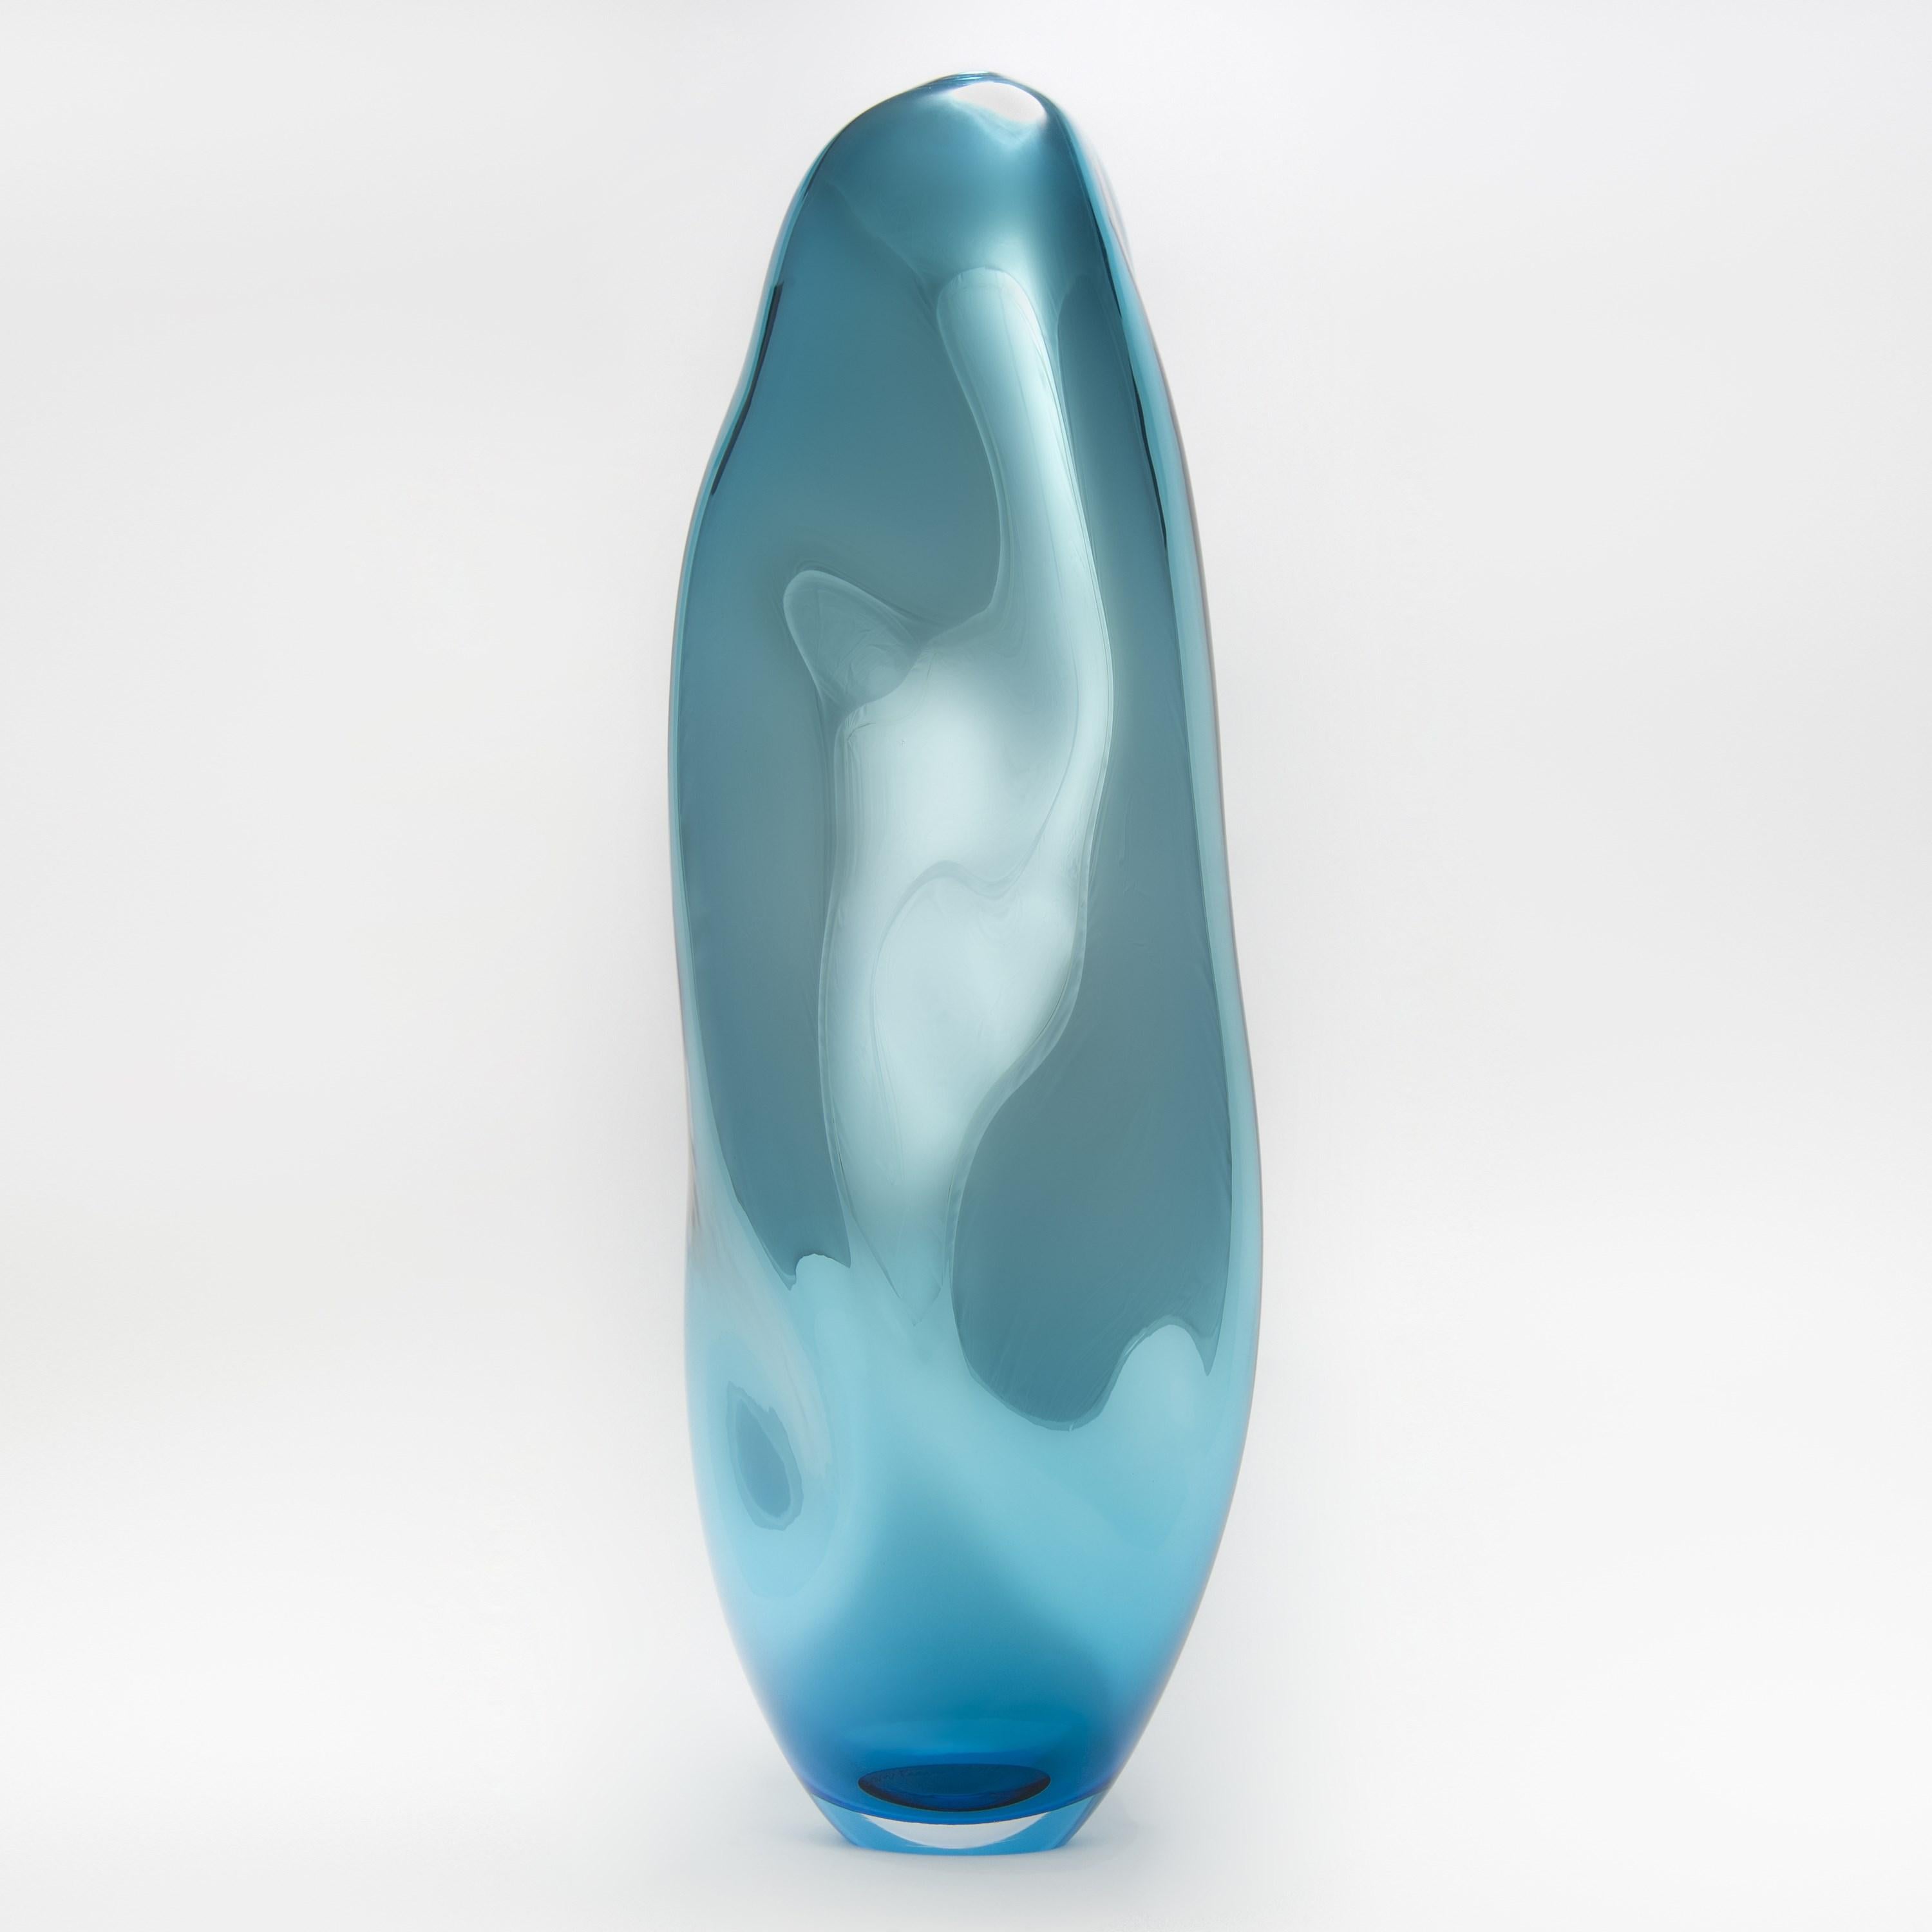 Glass v Metal in Turquoise is a unique handblown sculptural glass vessel created by the British artist Liam Reeves. Handblown in turquoise / aquamarine coloured glass, the interior has a mirrored finish, which results in a beautiful metallic effect.